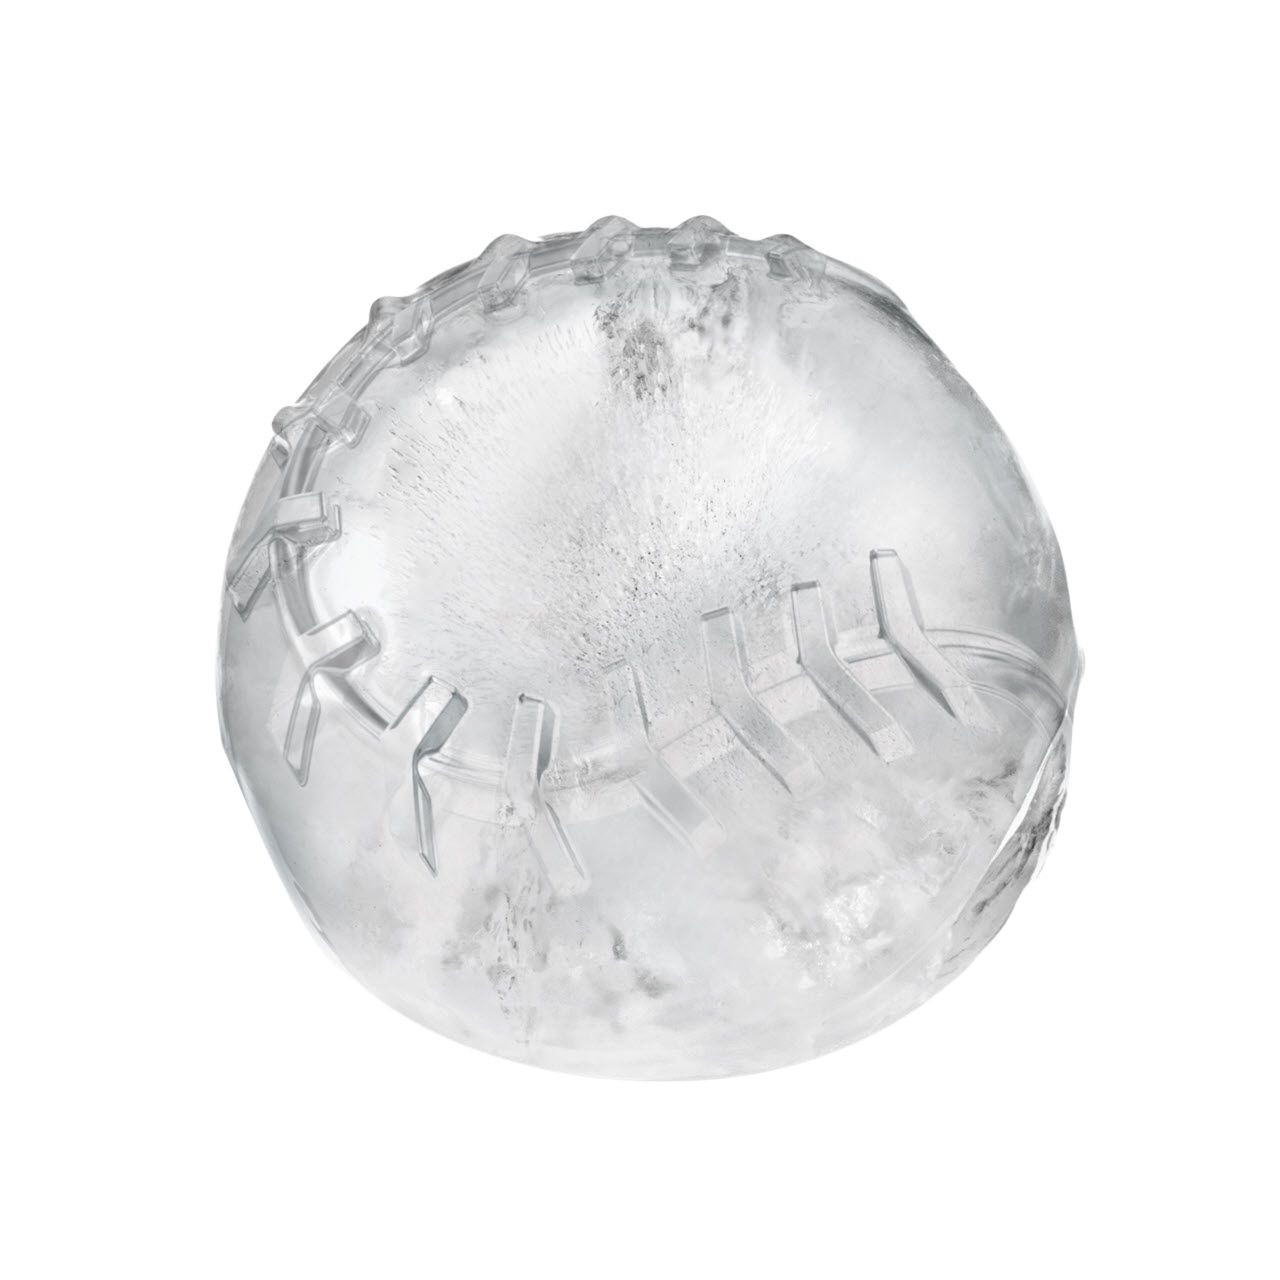 Tovolo Sphere Ice Molds - Set of 2 - Bunting Online Auctions